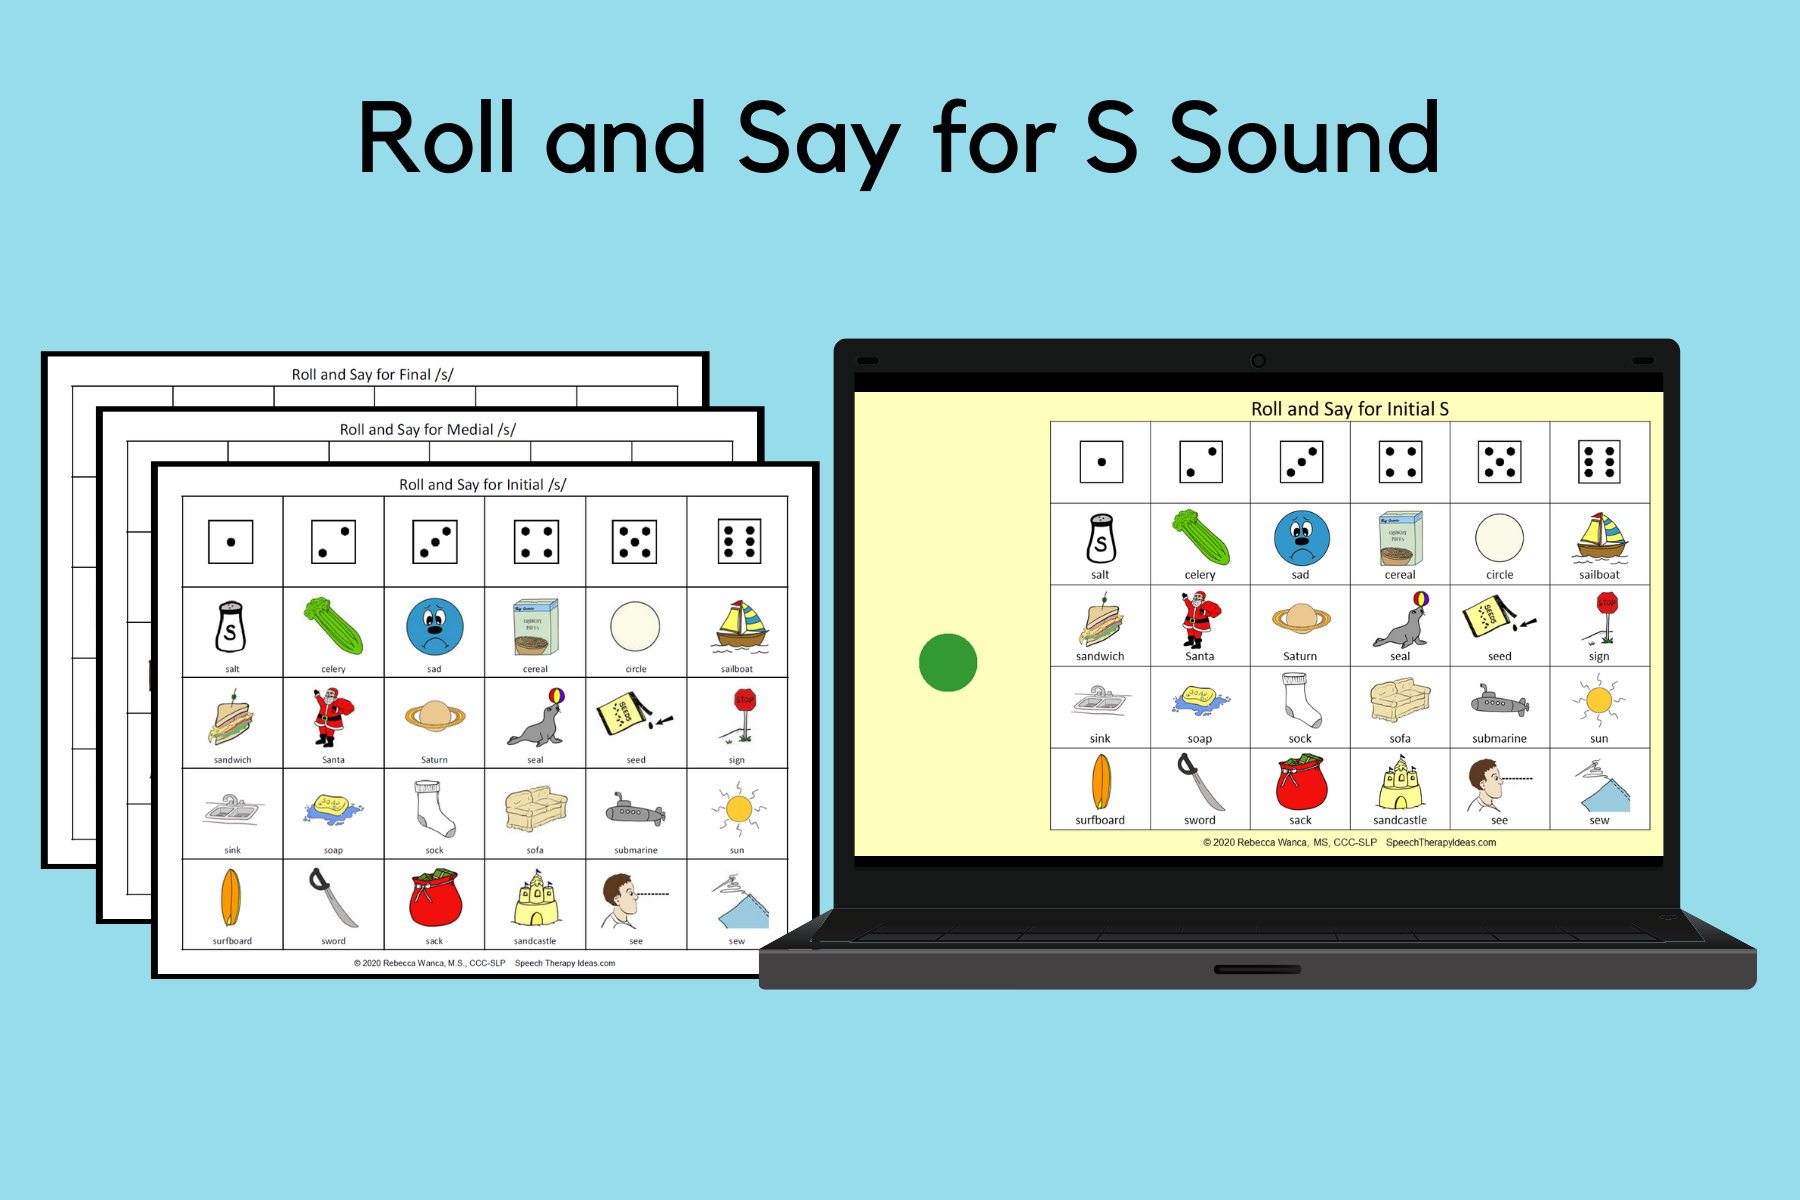 Roll and Say for S Sound